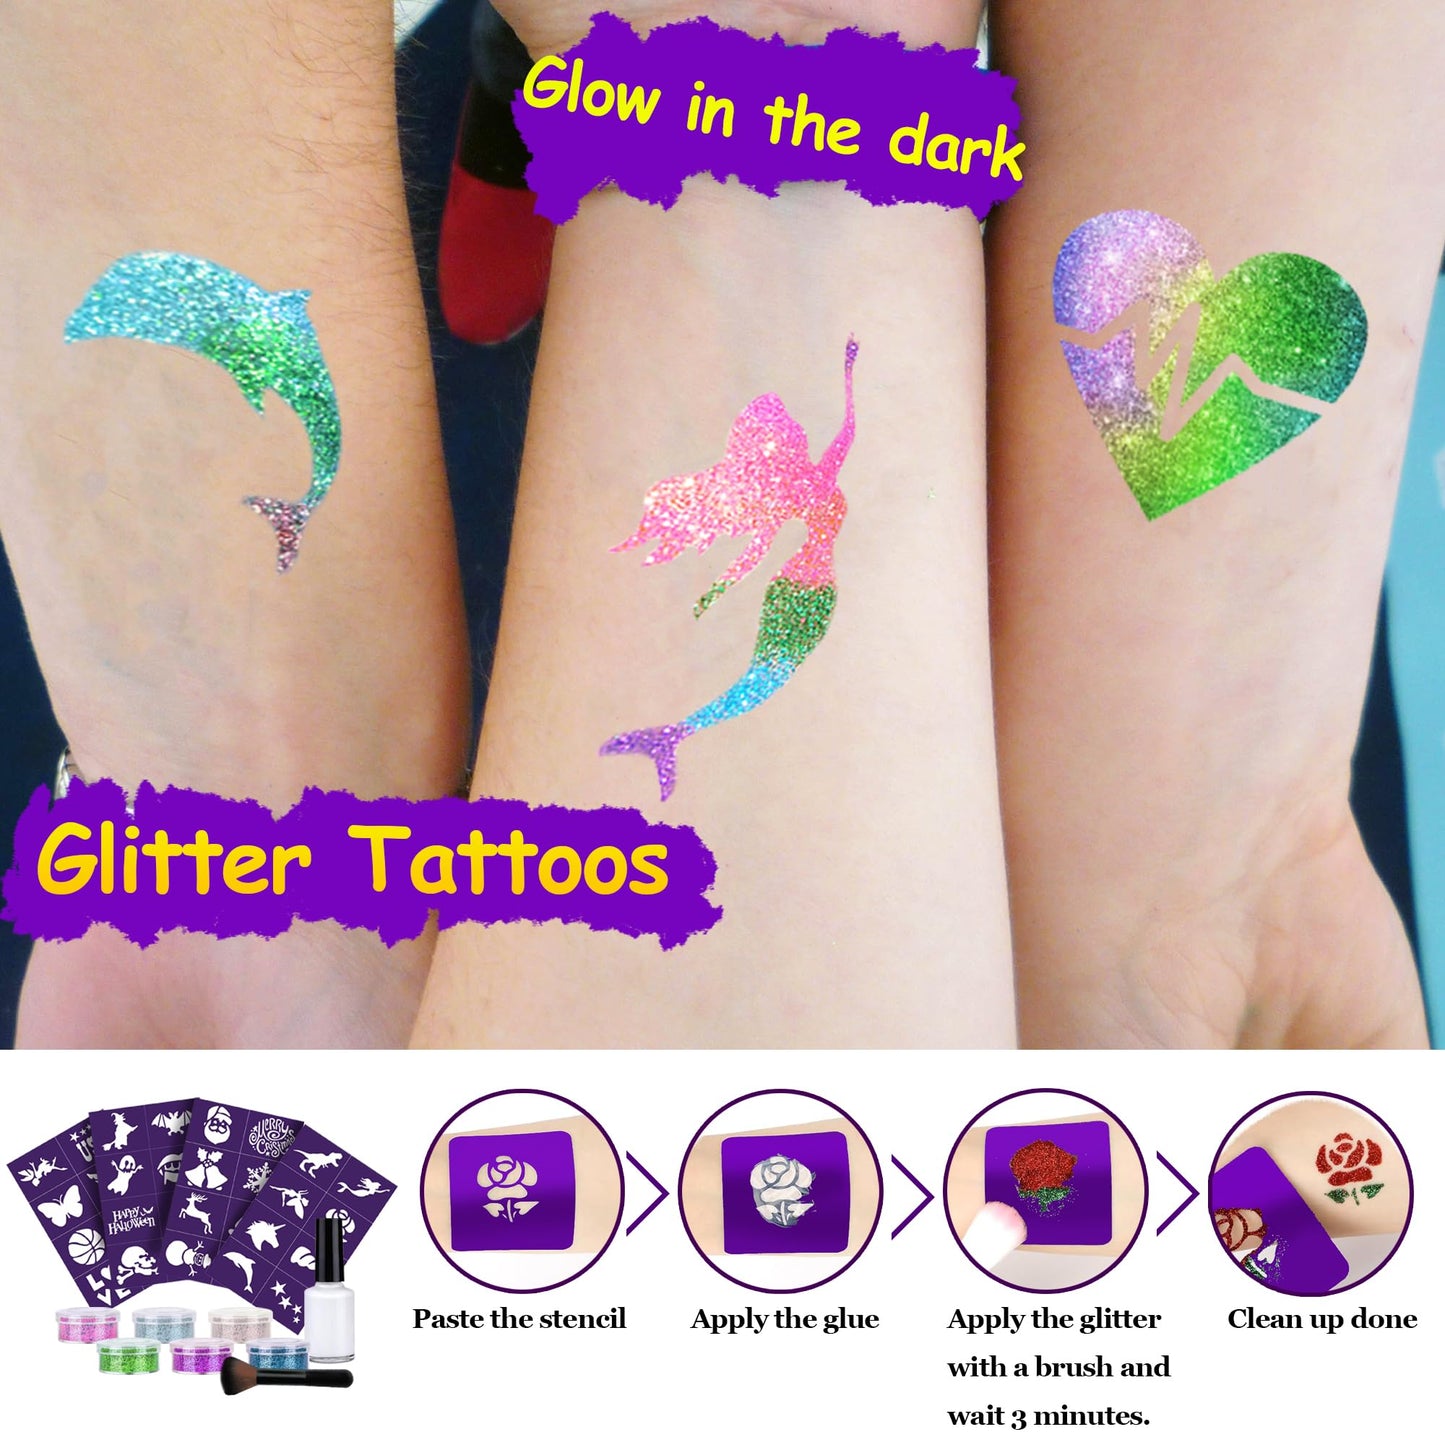 Temporary Shimmer Tattoo Kit for Kids - Glitter Tattoo & Mermaid Glitter Body Art for Girls - Glow in The Dark - Arts & Crafts Gifts for Kids Ages